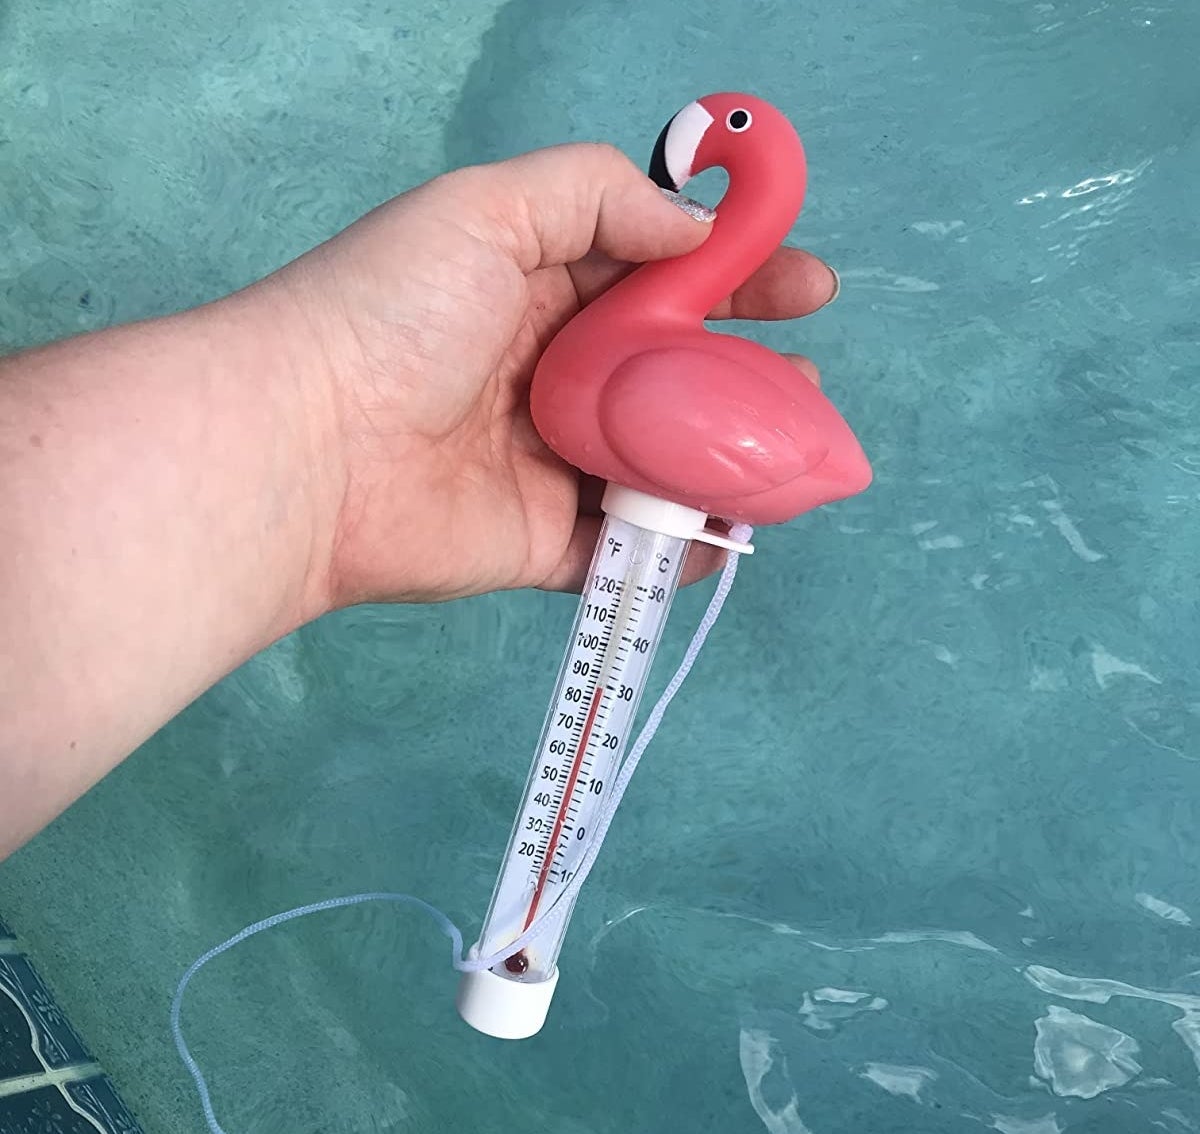 The flamingo thermometer